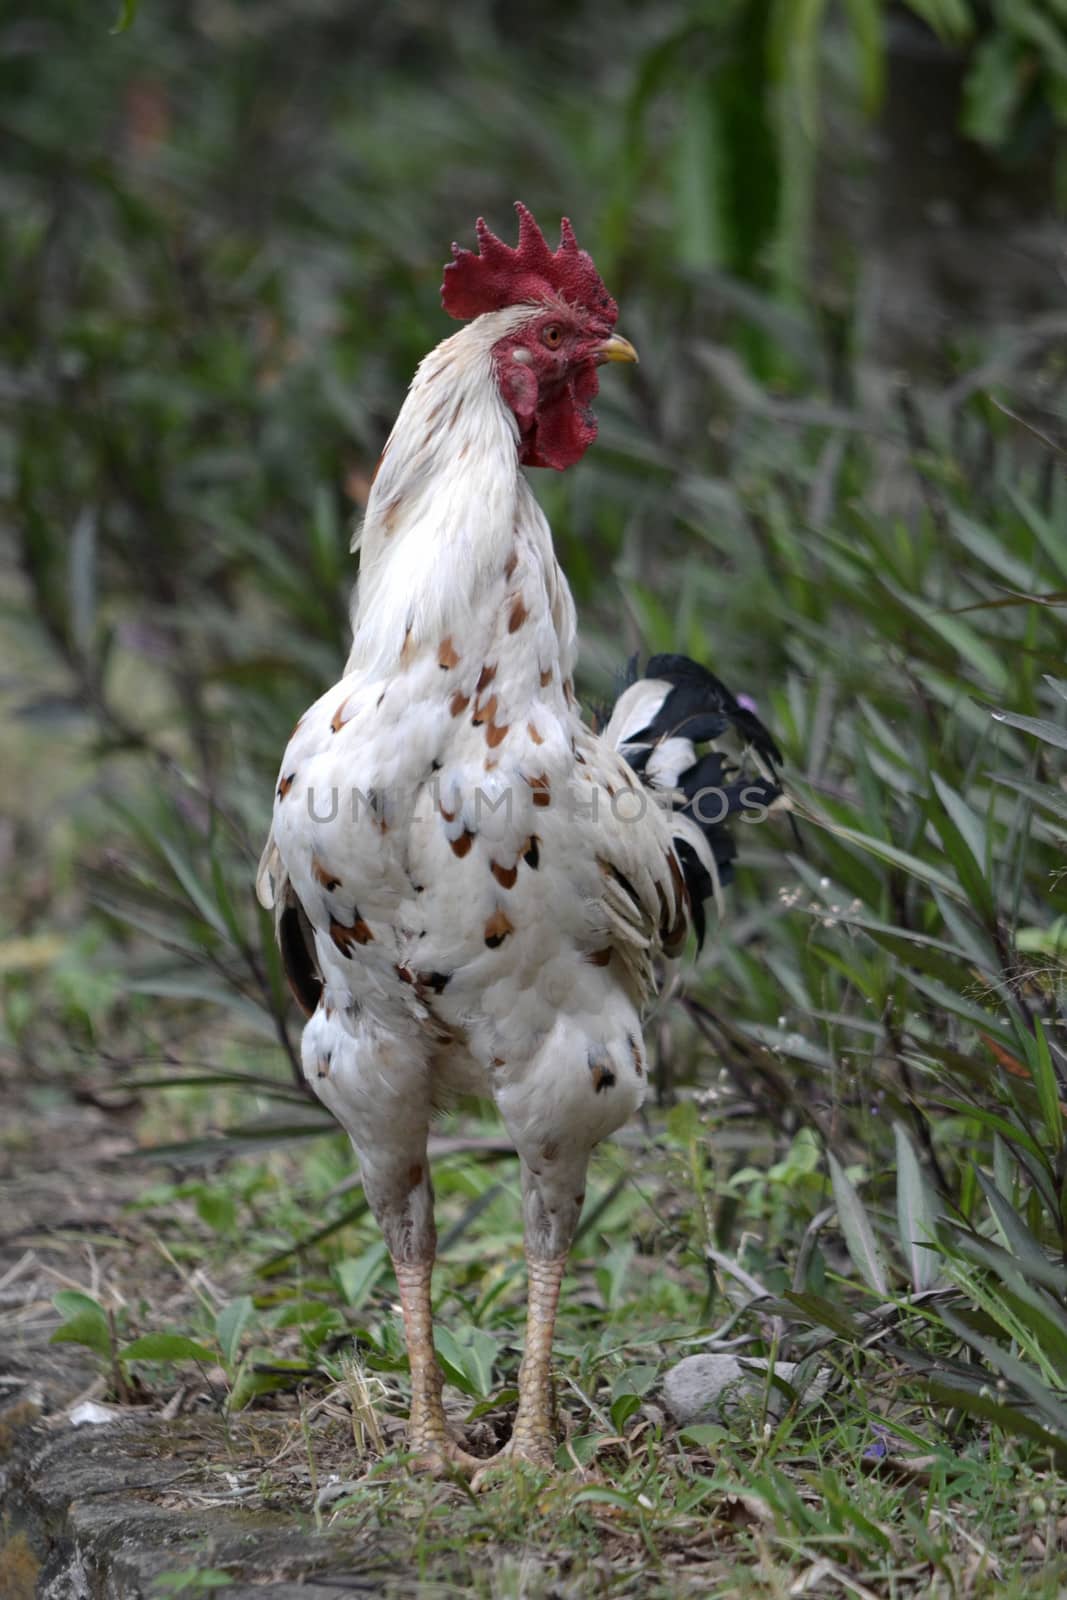 adult white cock in their natural habitat